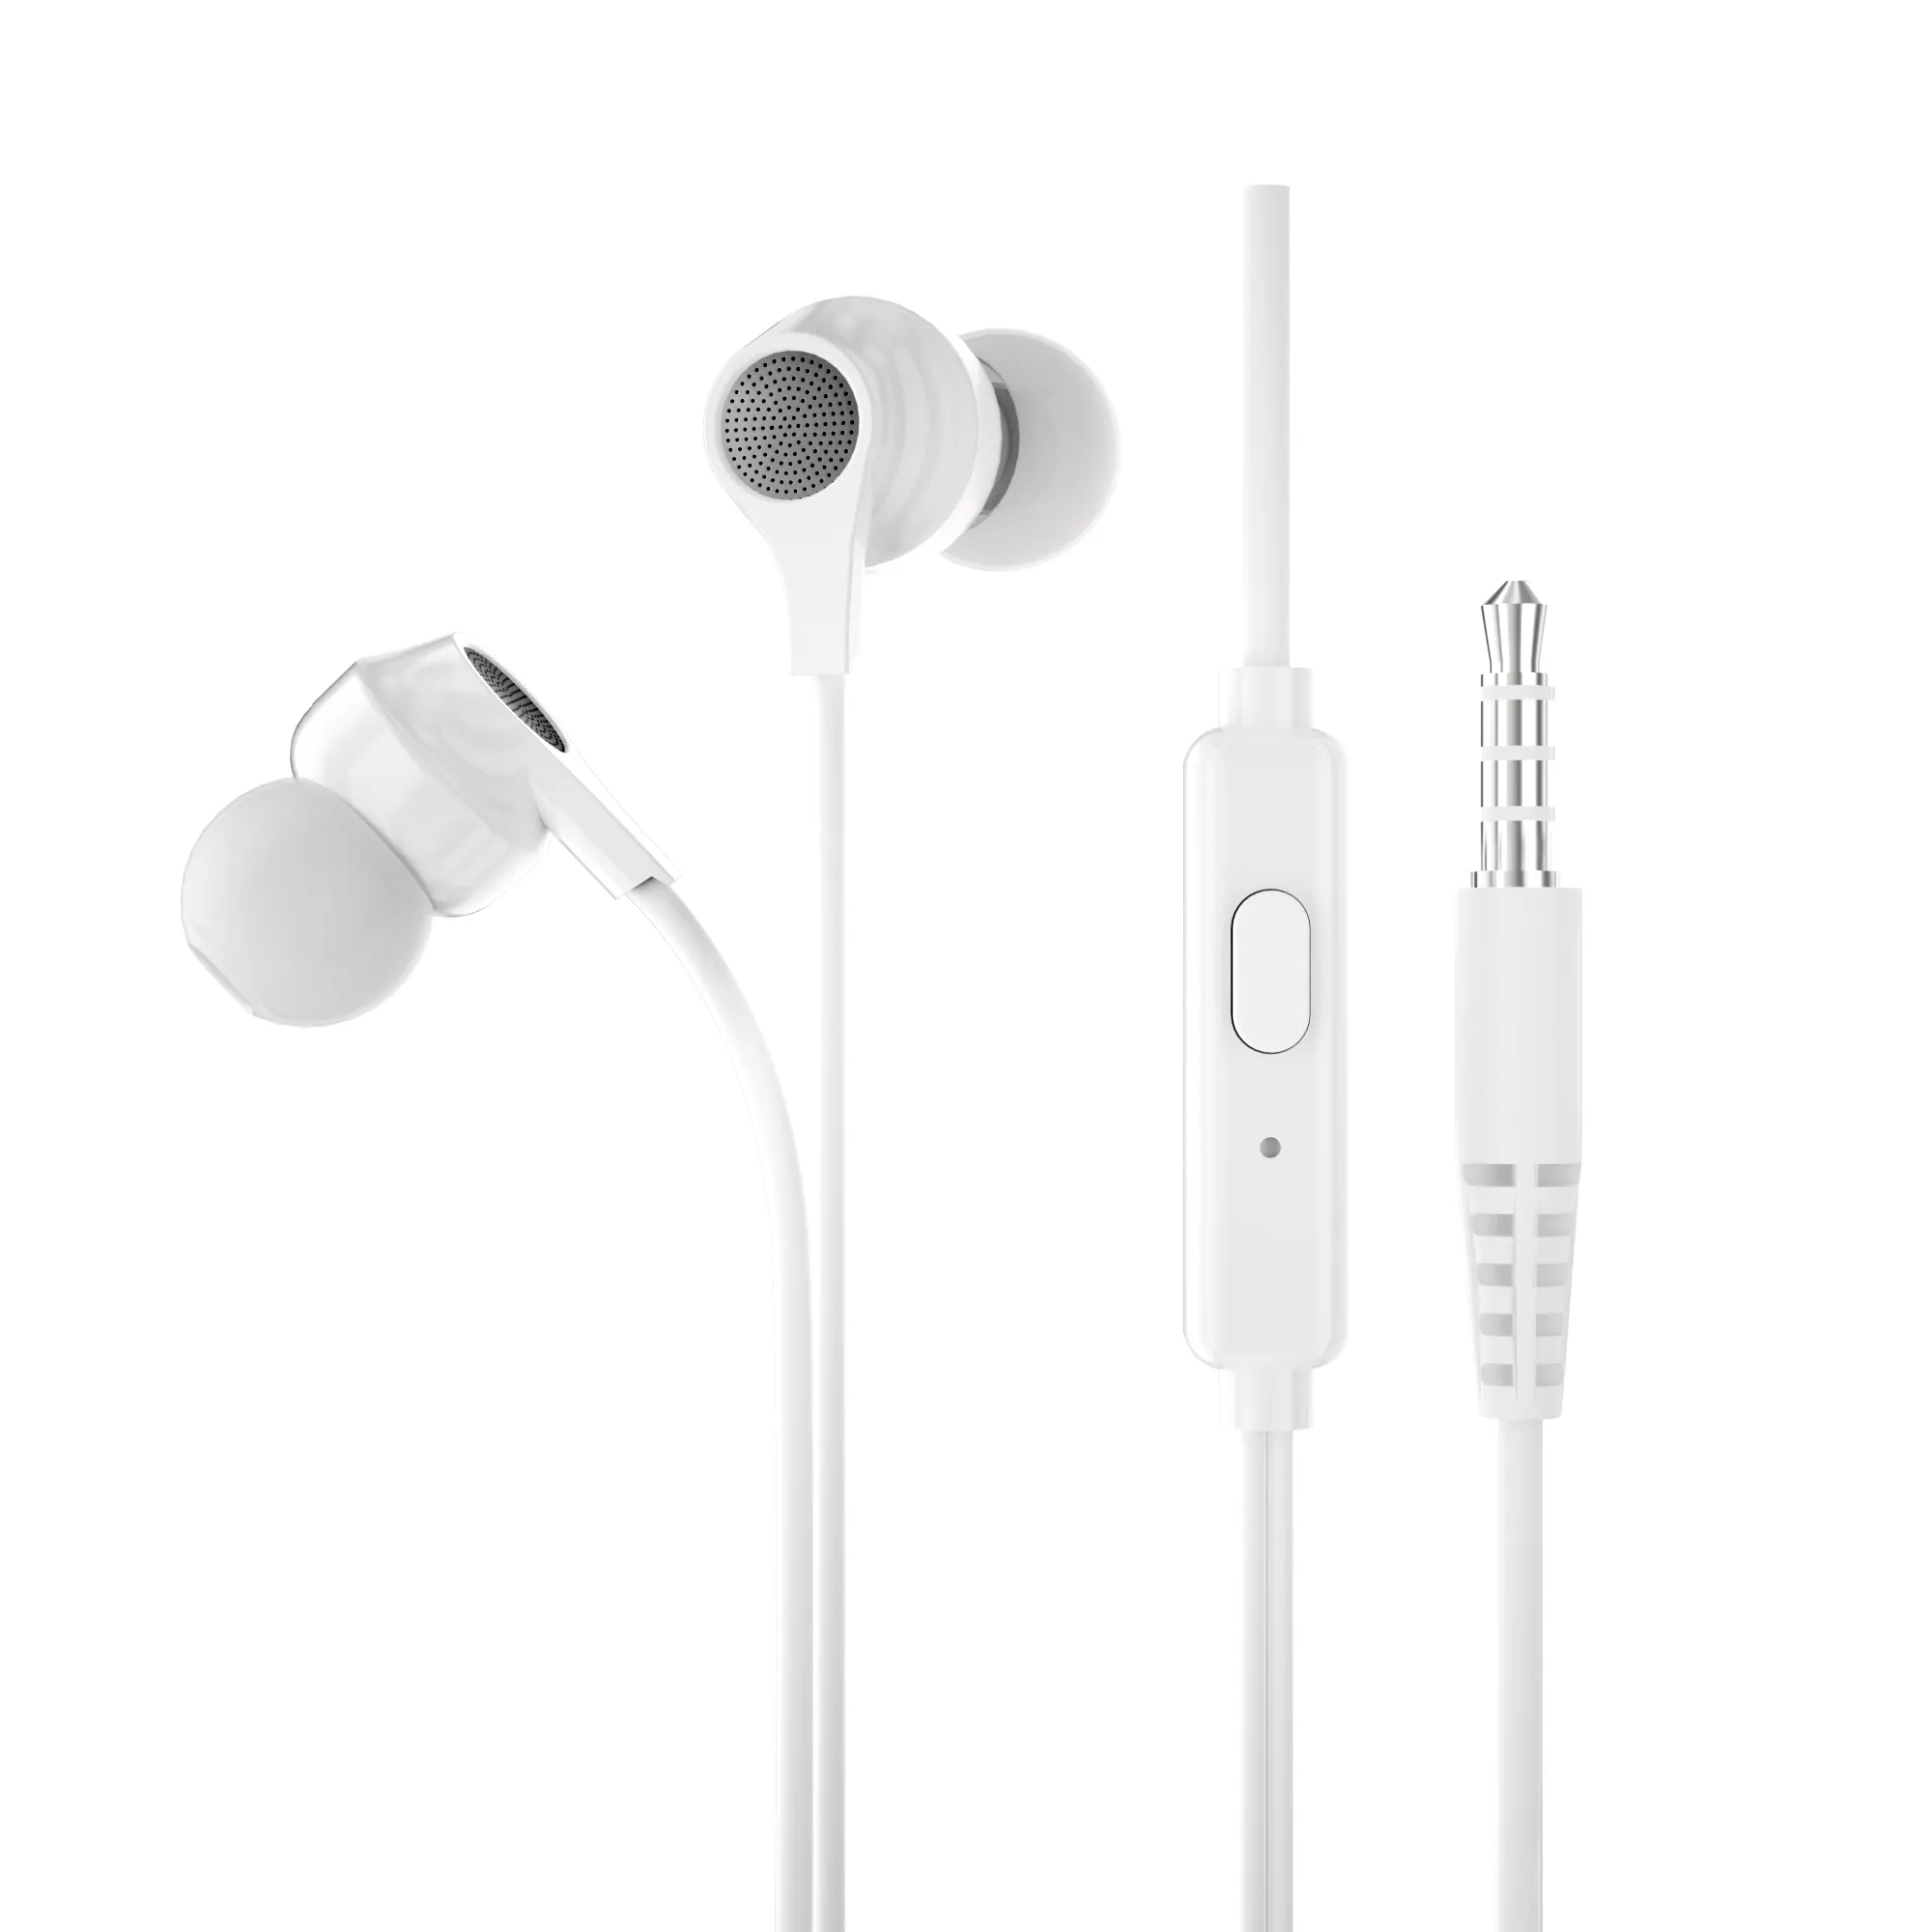 KINGLEEN I1912 Hot Sale Cheap Price Headset 3.5mm Handsfree Earphone For Android Mobile Universal Wire Earbud Headphone